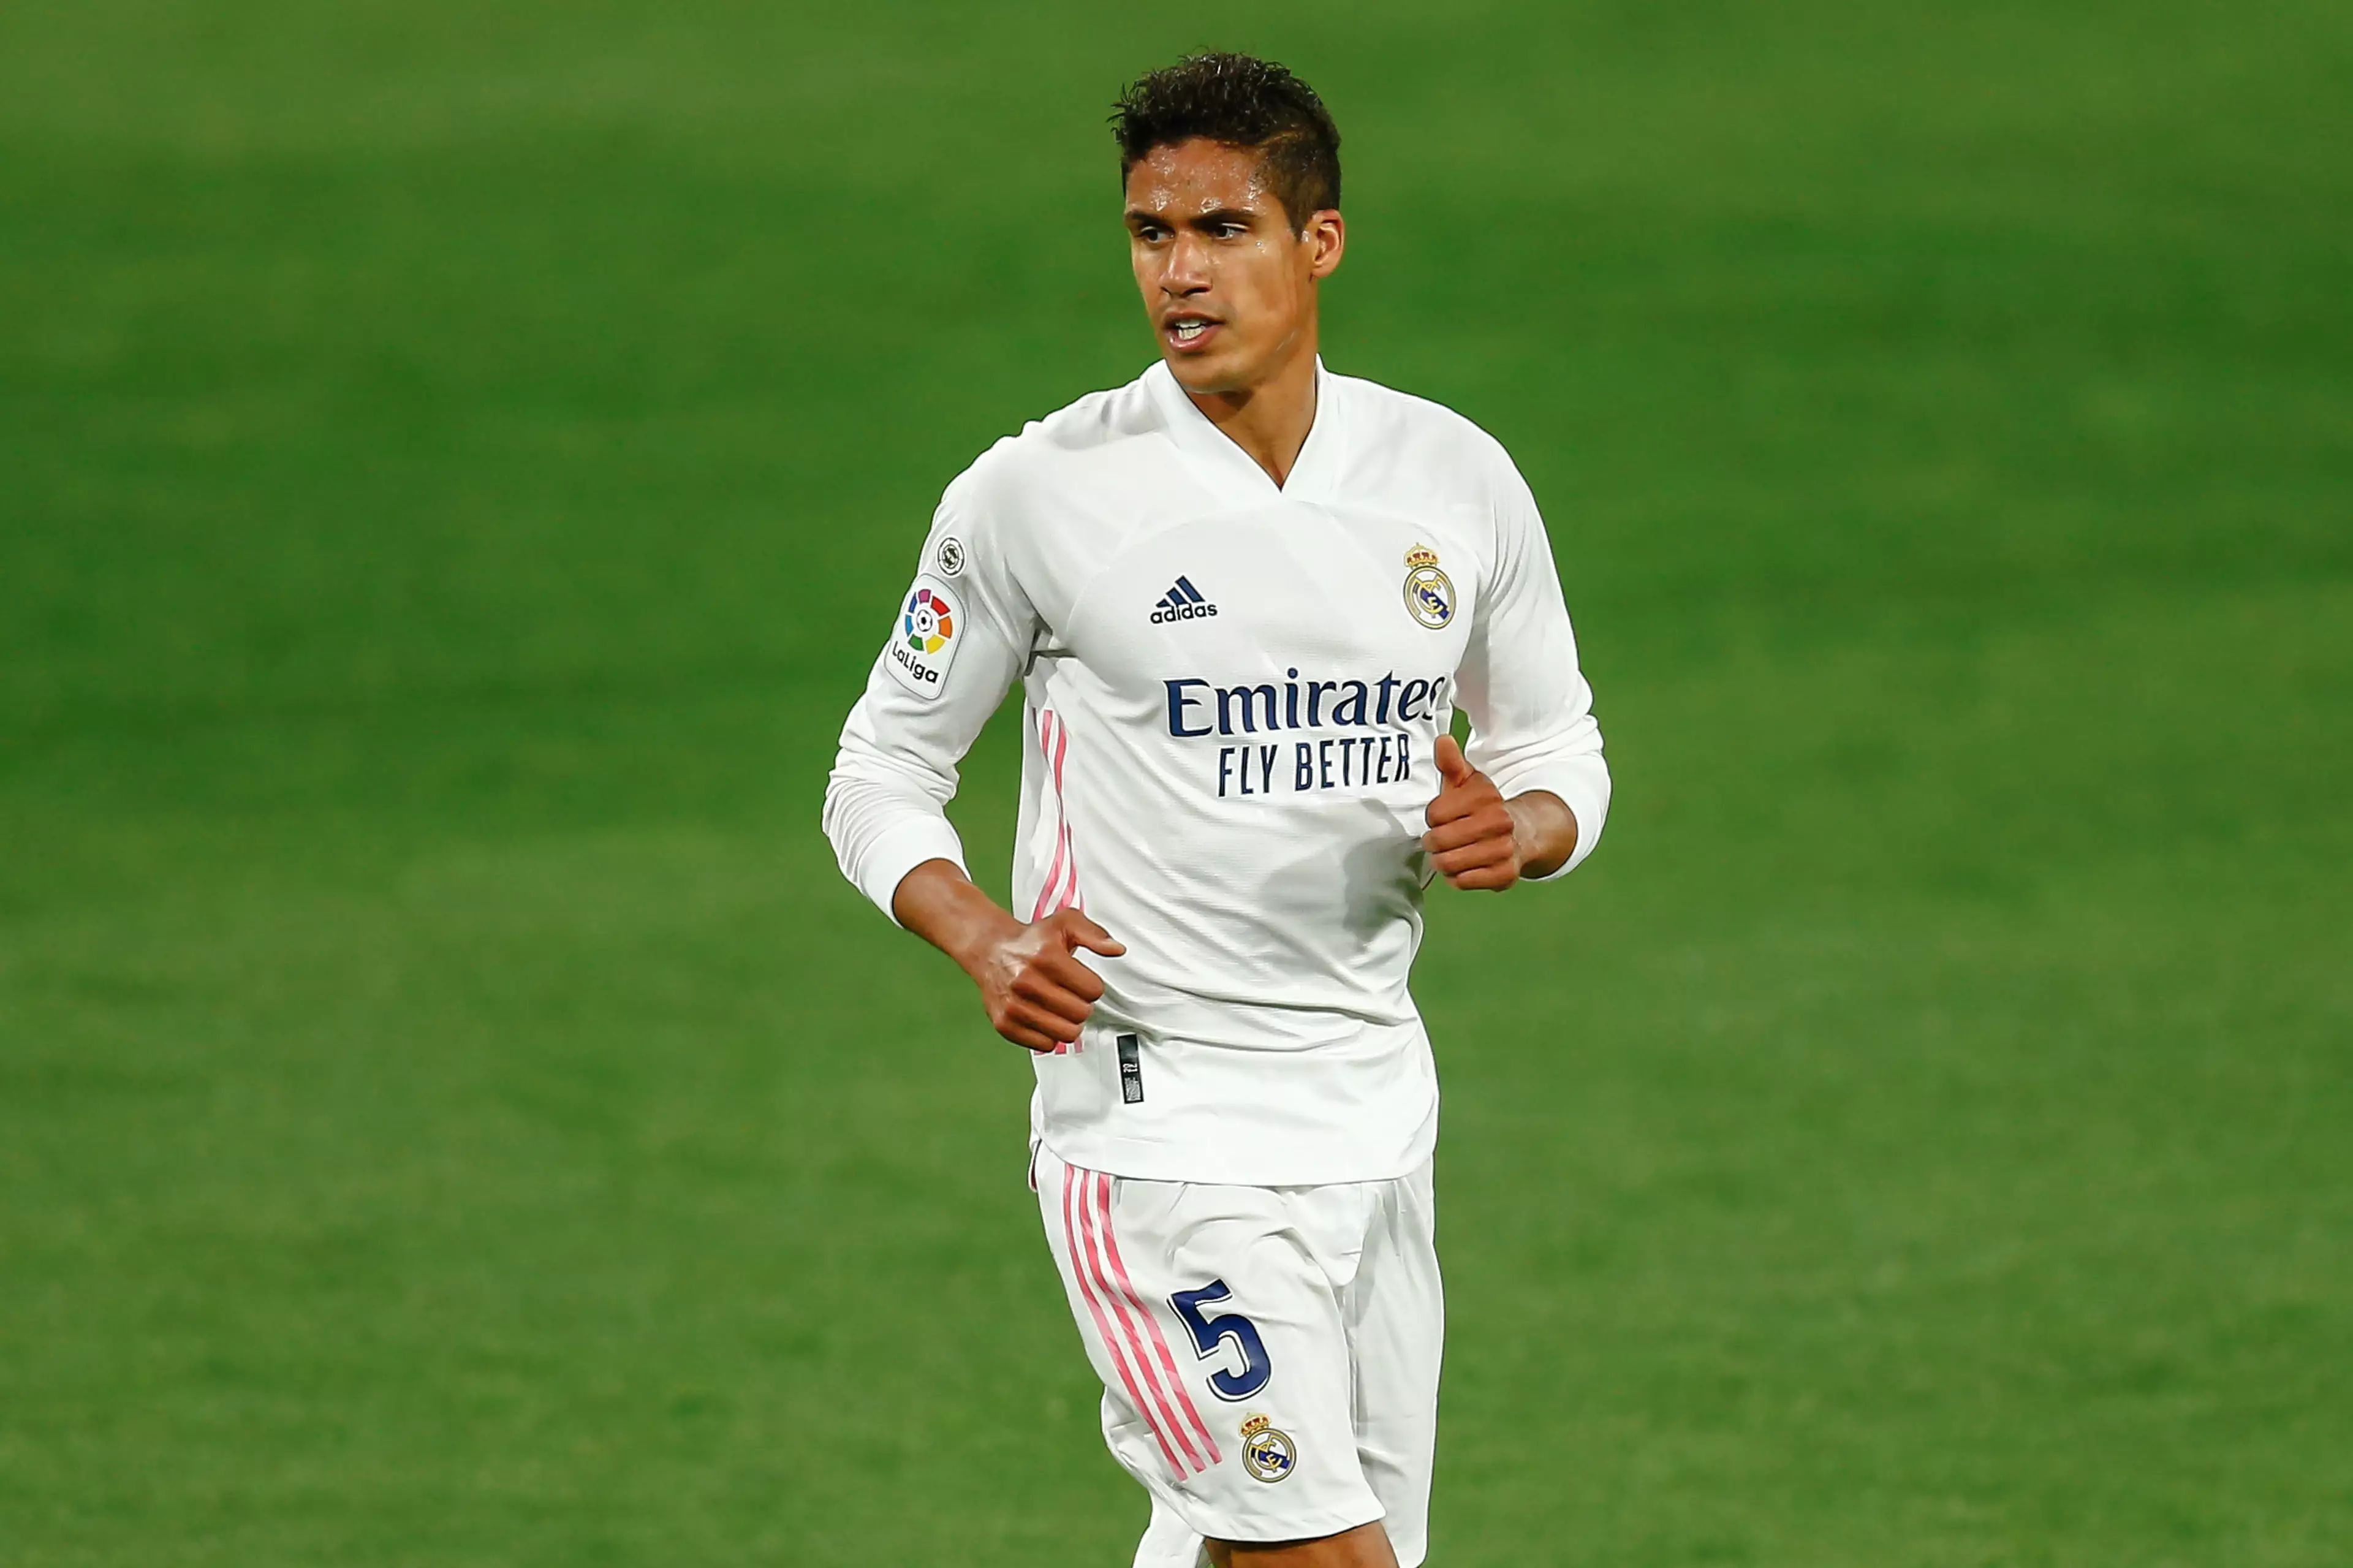 United will hope they can sign Varane despite Ramos leaving the Bernabeu already. Image: PA Images